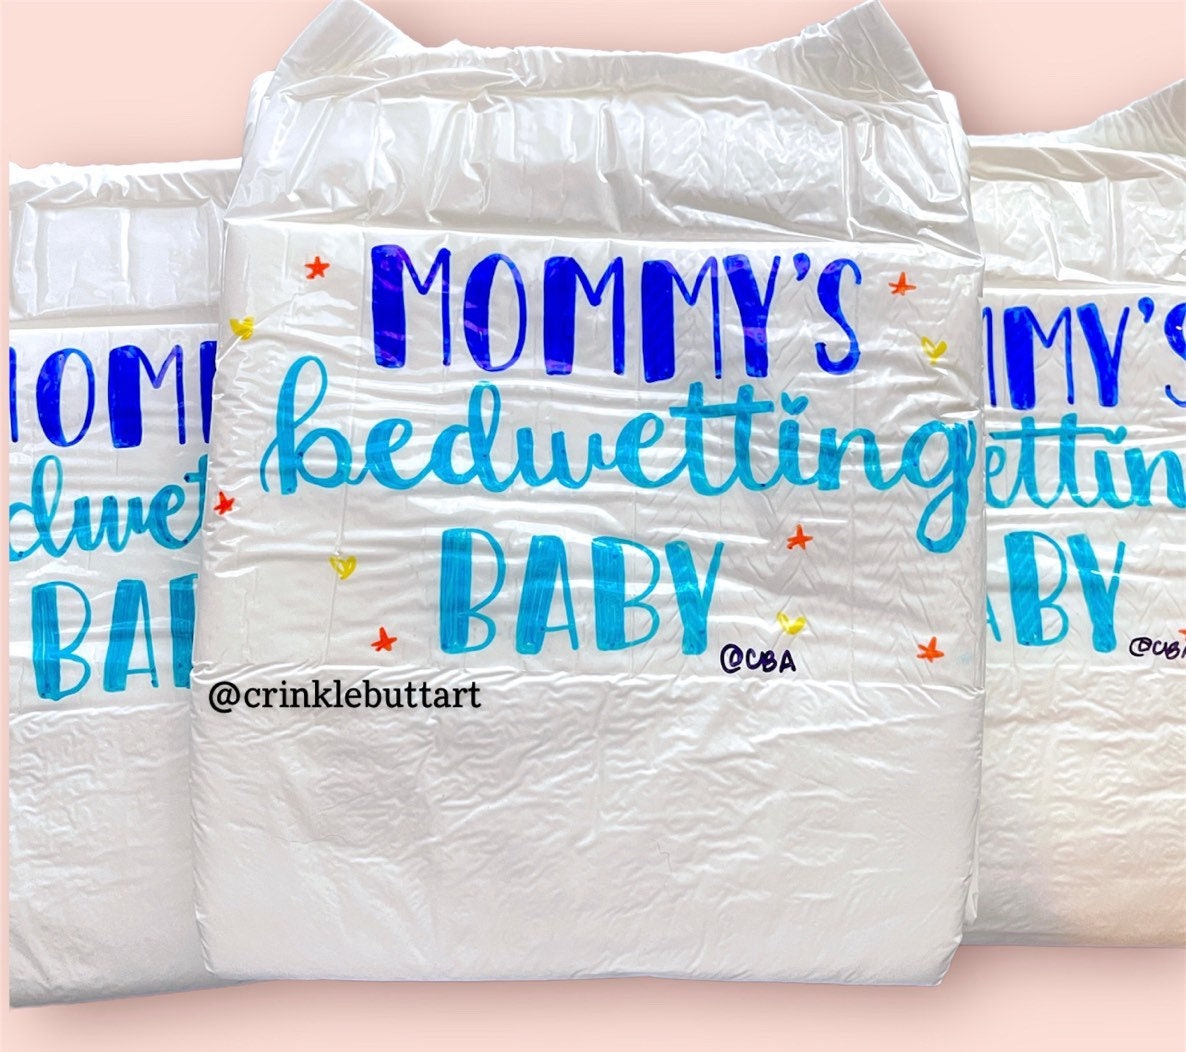 ABDL Adult Baby Diaper “Mommy’s Bedwetting Baby”